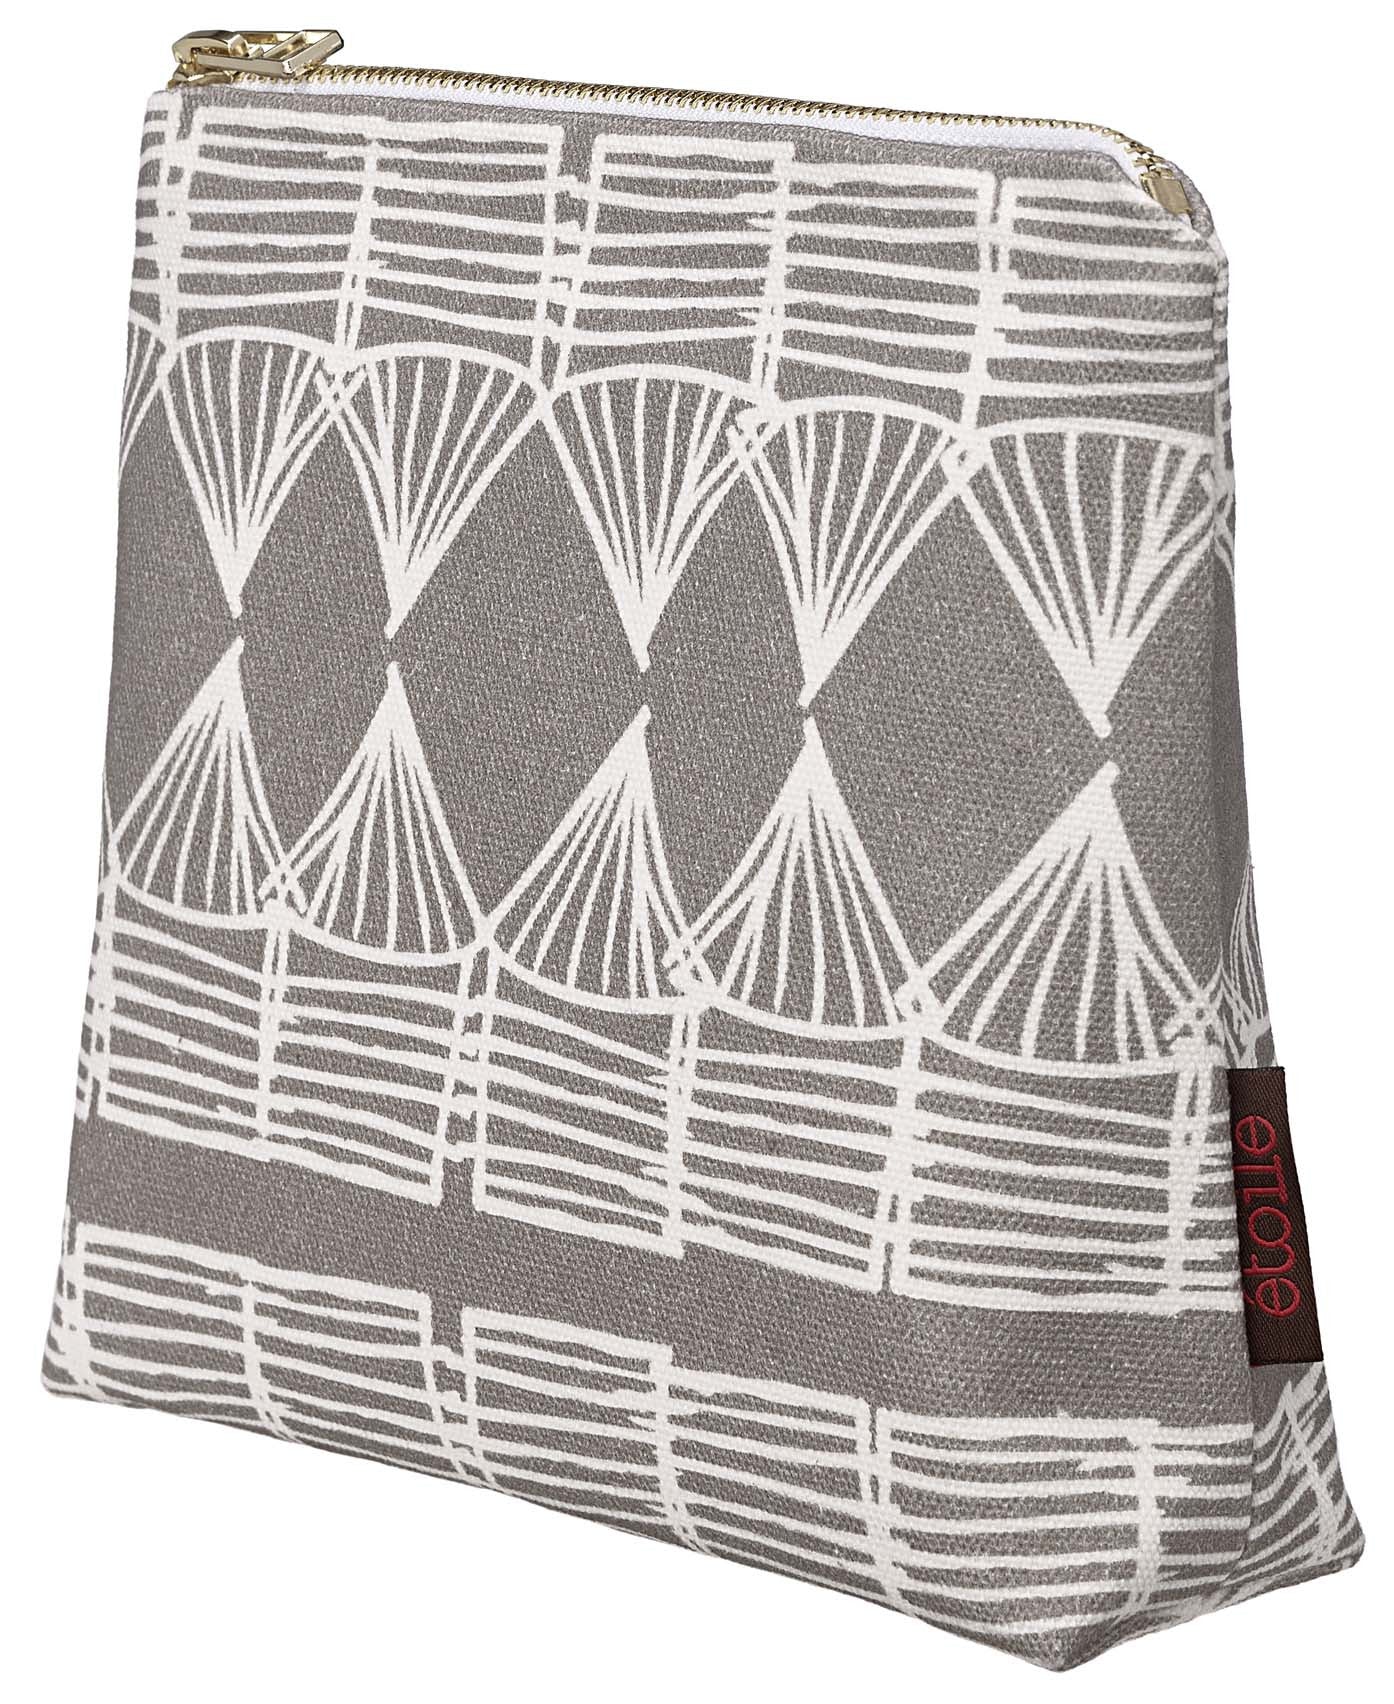 Tiki Huts Pattern Cotton Canvas Cosmetic Bag in Light Dove Grey